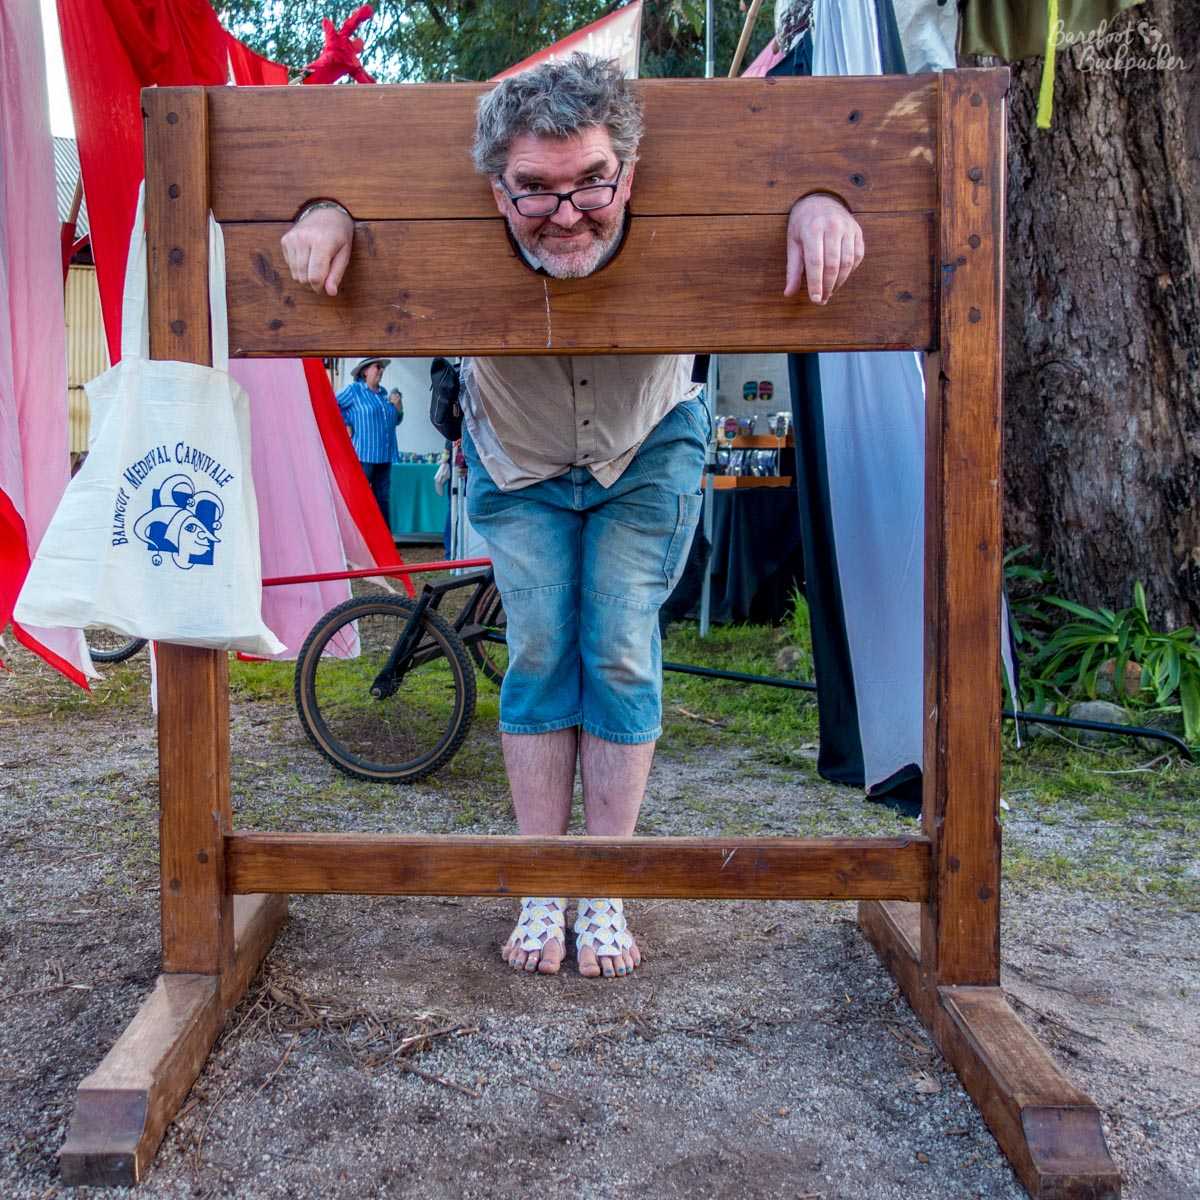 The Barefoot Backpacker locked in a pillory, Mediaeval Carnivale, Balingup